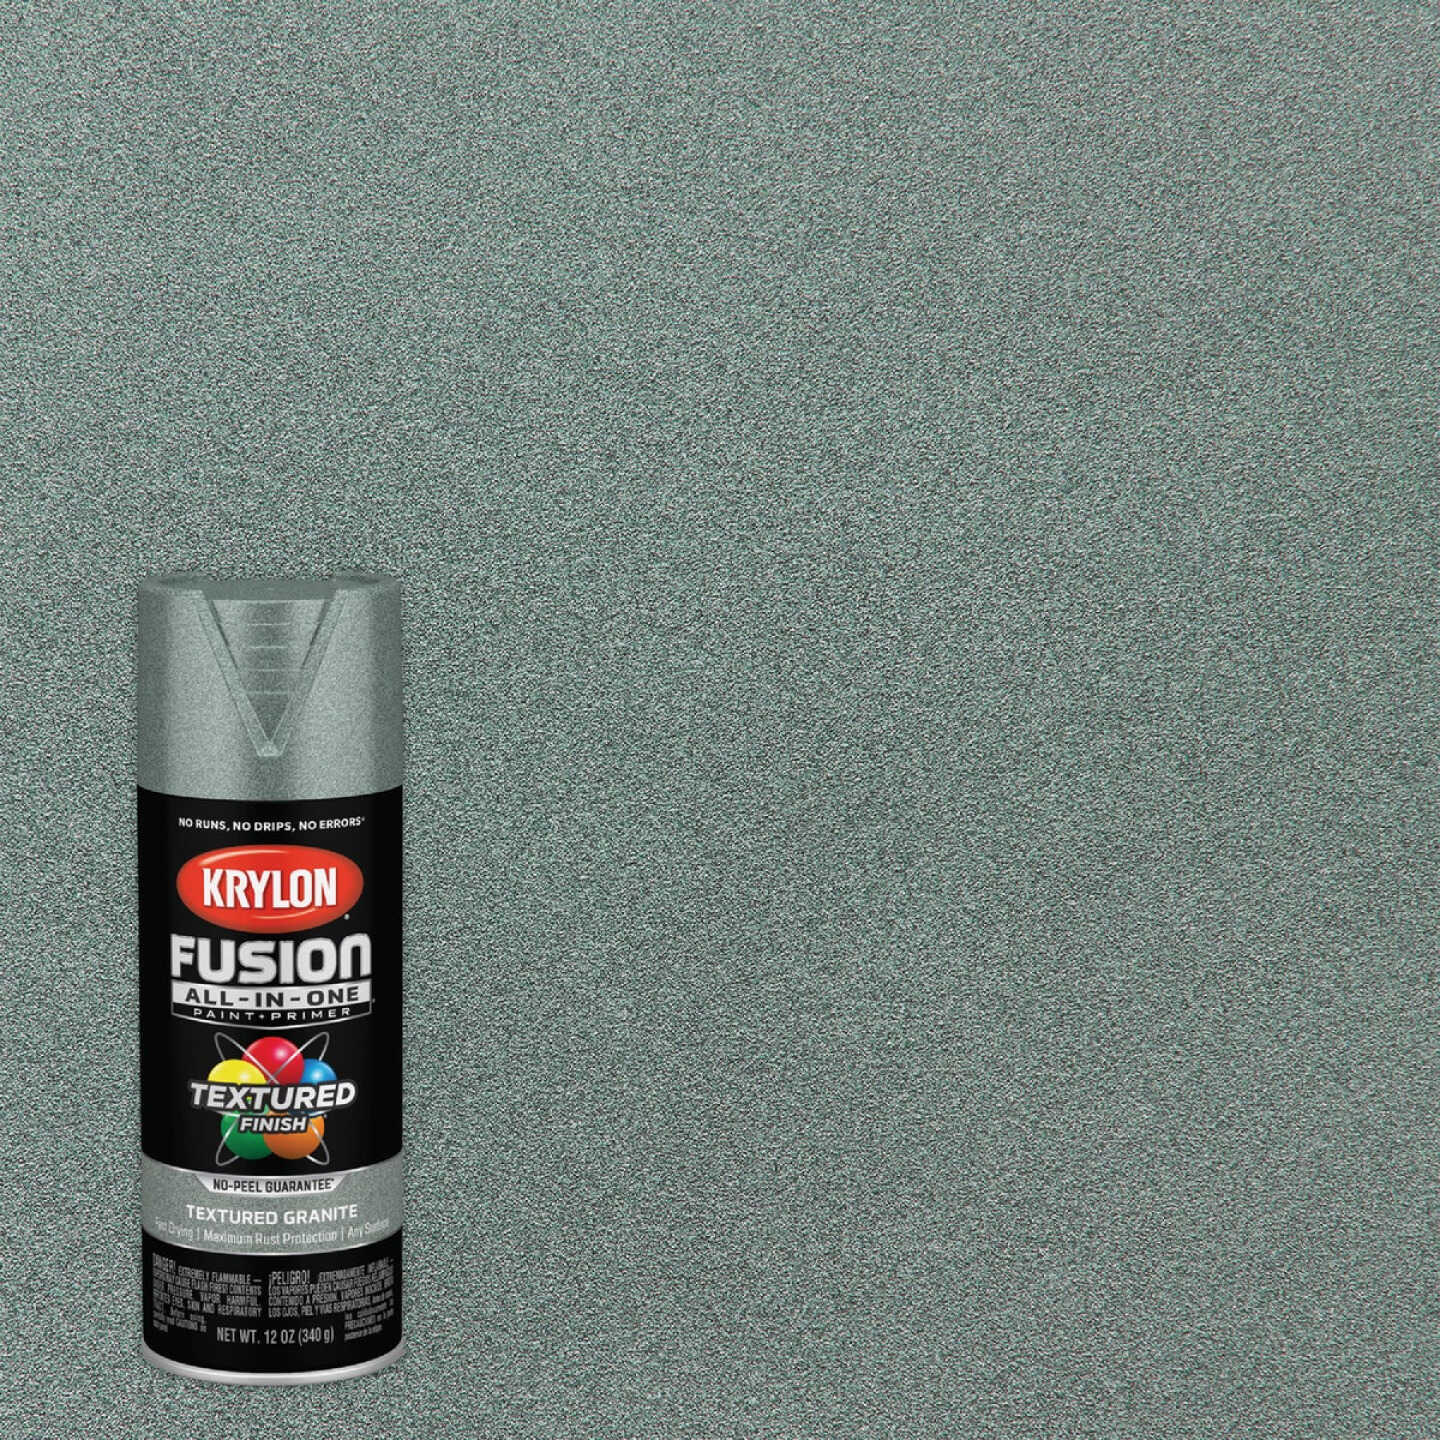 Krylon FUSION ALL-IN-ONE Gloss Hot Pink Spray Paint and Primer In